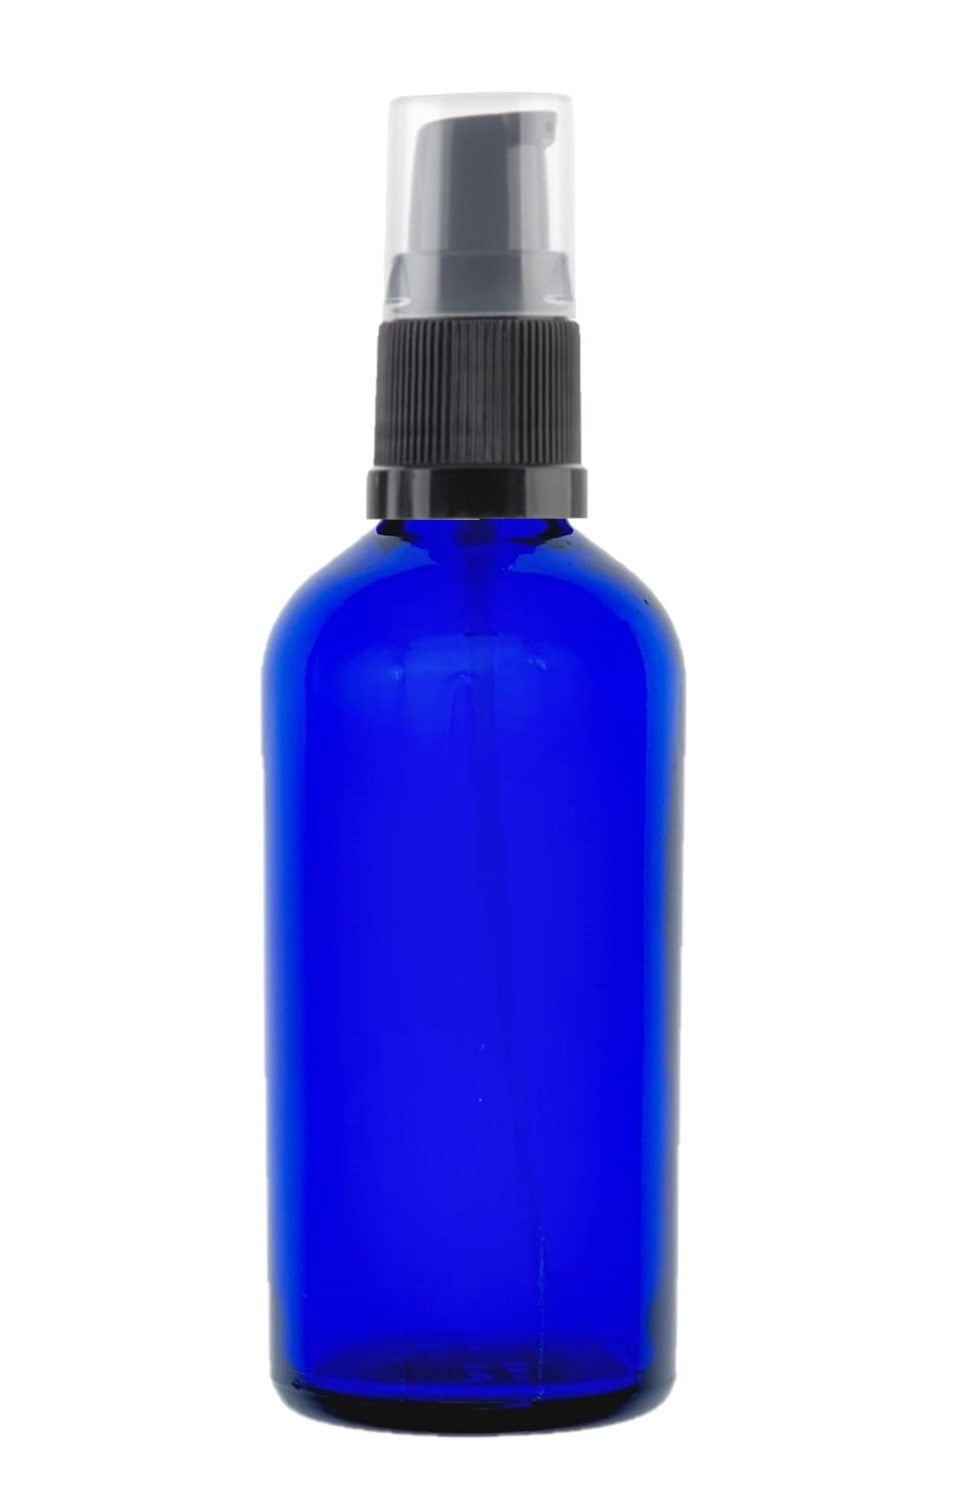 100ml Blue Glass Bottles with Black Treatment Pump and Clear Overcap